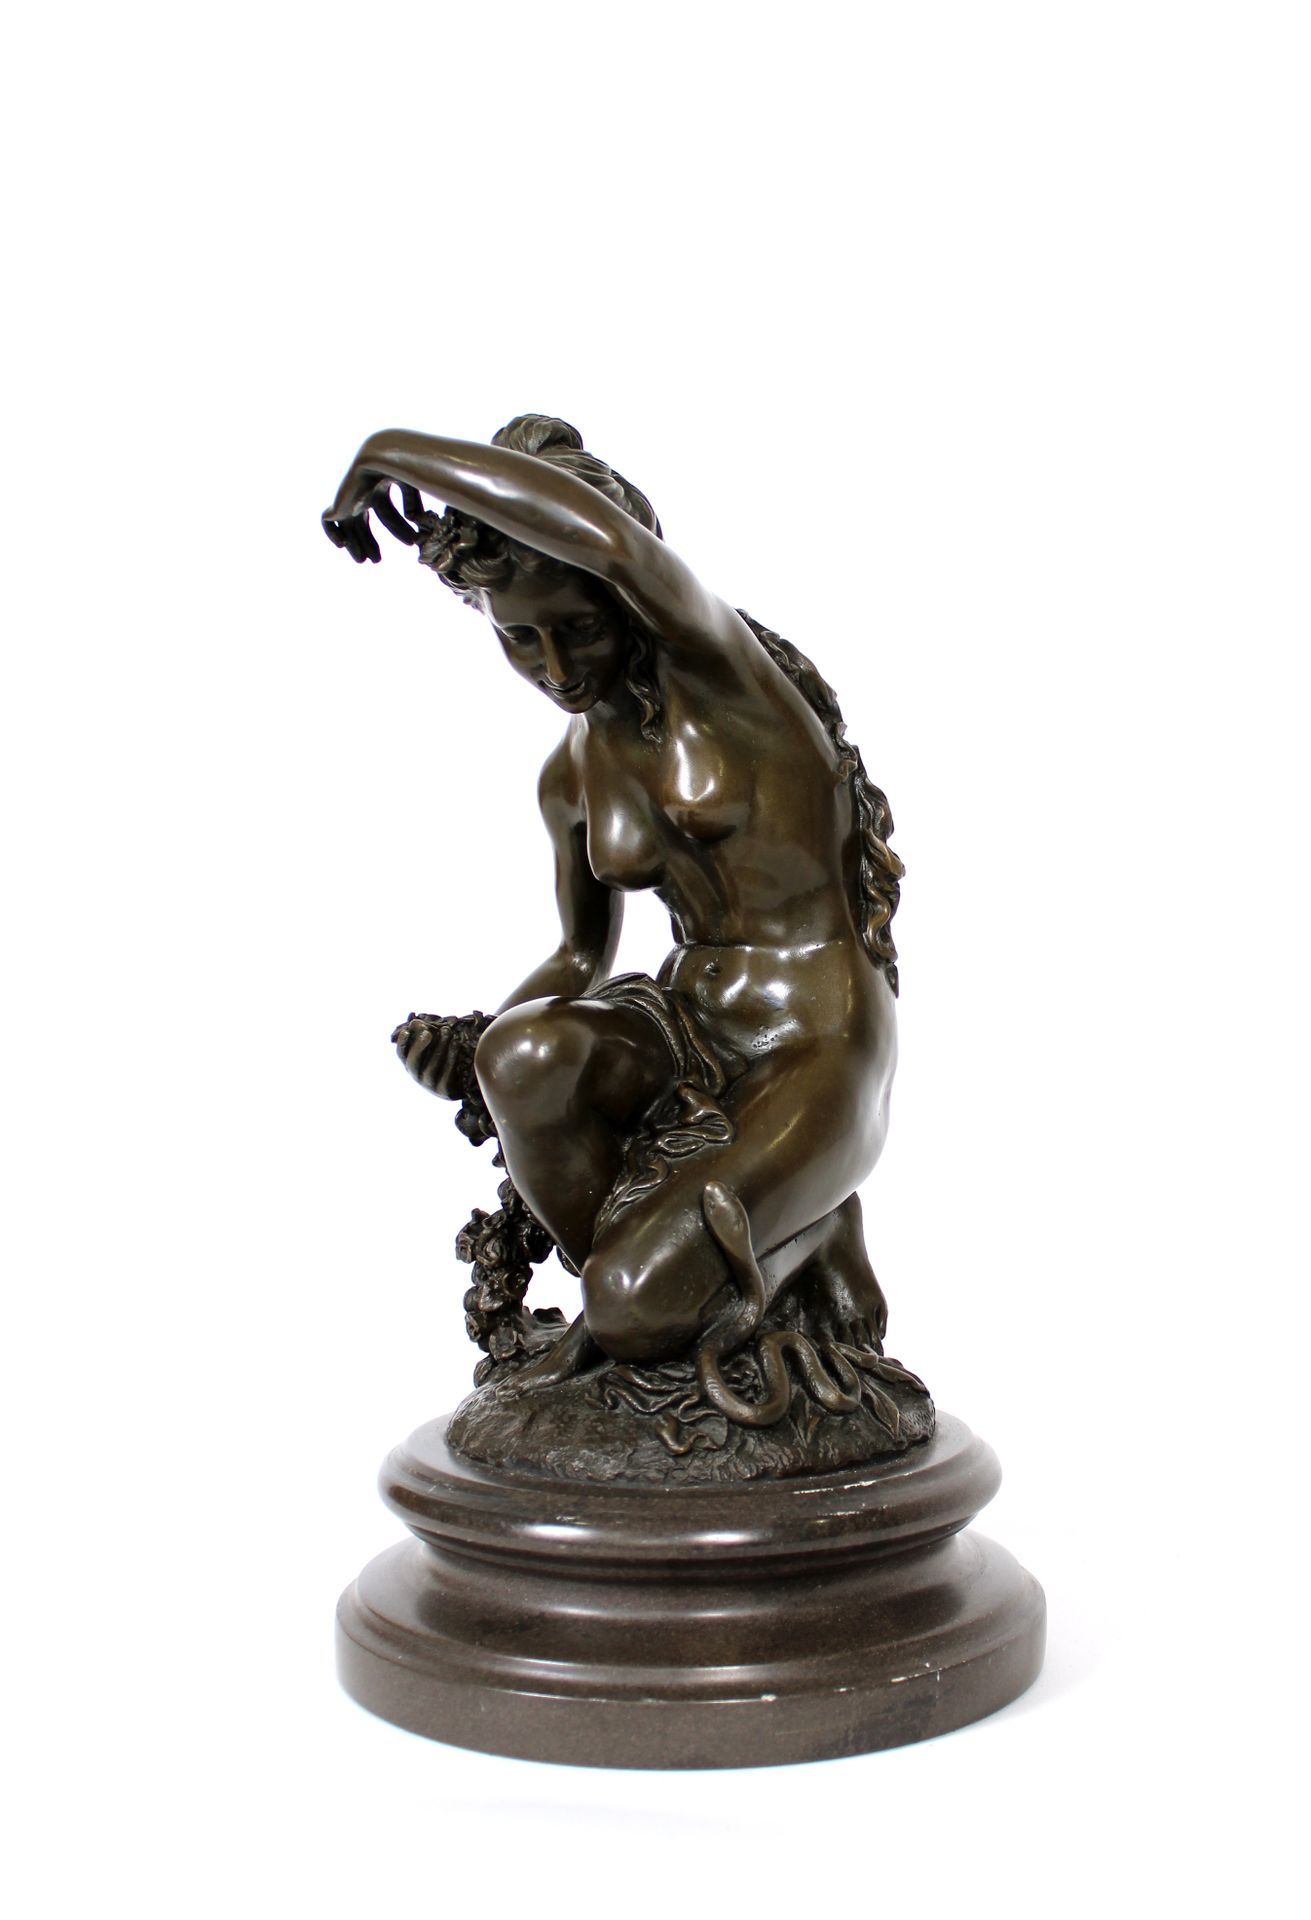 Null 20th century school in the 19th century style
Eve and the snake
Bronze with&hellip;